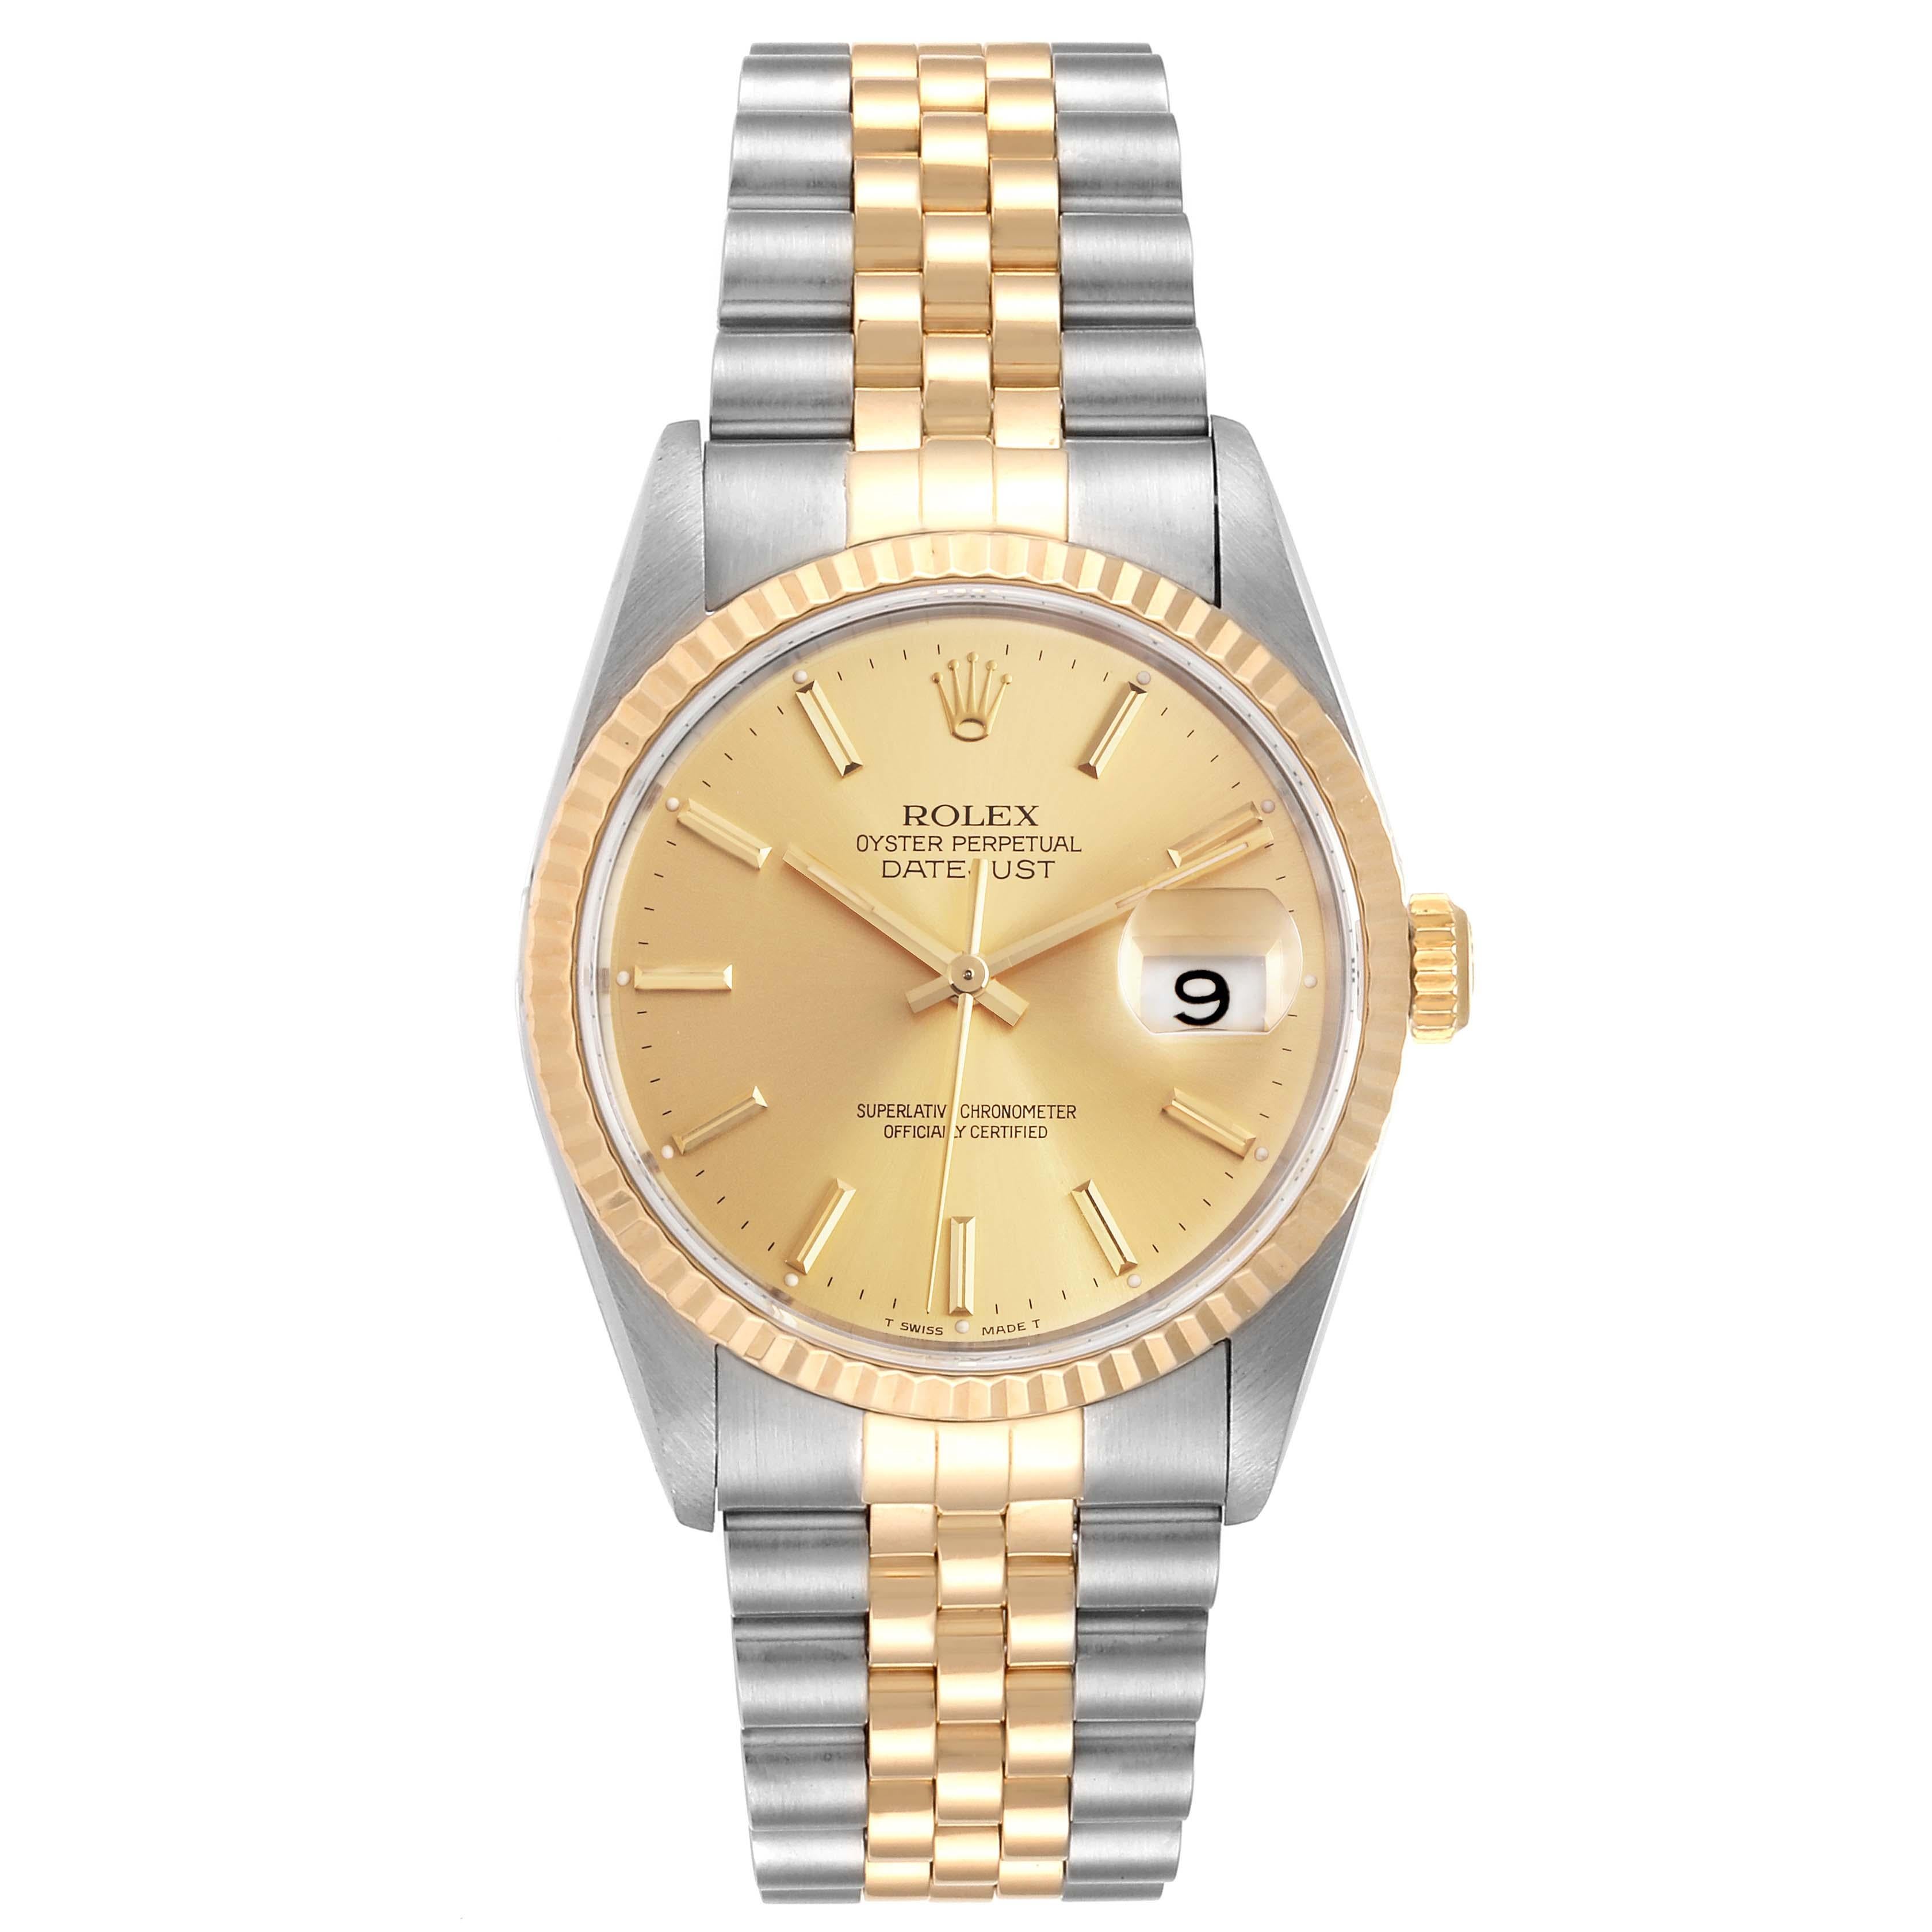 Rolex Datejust Steel 18K Yellow Gold Fluted Bezel Mens Watch 16233. Officially certified chronometer self-winding movement. Stainless steel case 36 mm in diameter. Rolex logo on a 18K yellow gold crown. 18k yellow gold fluted bezel. Scratch